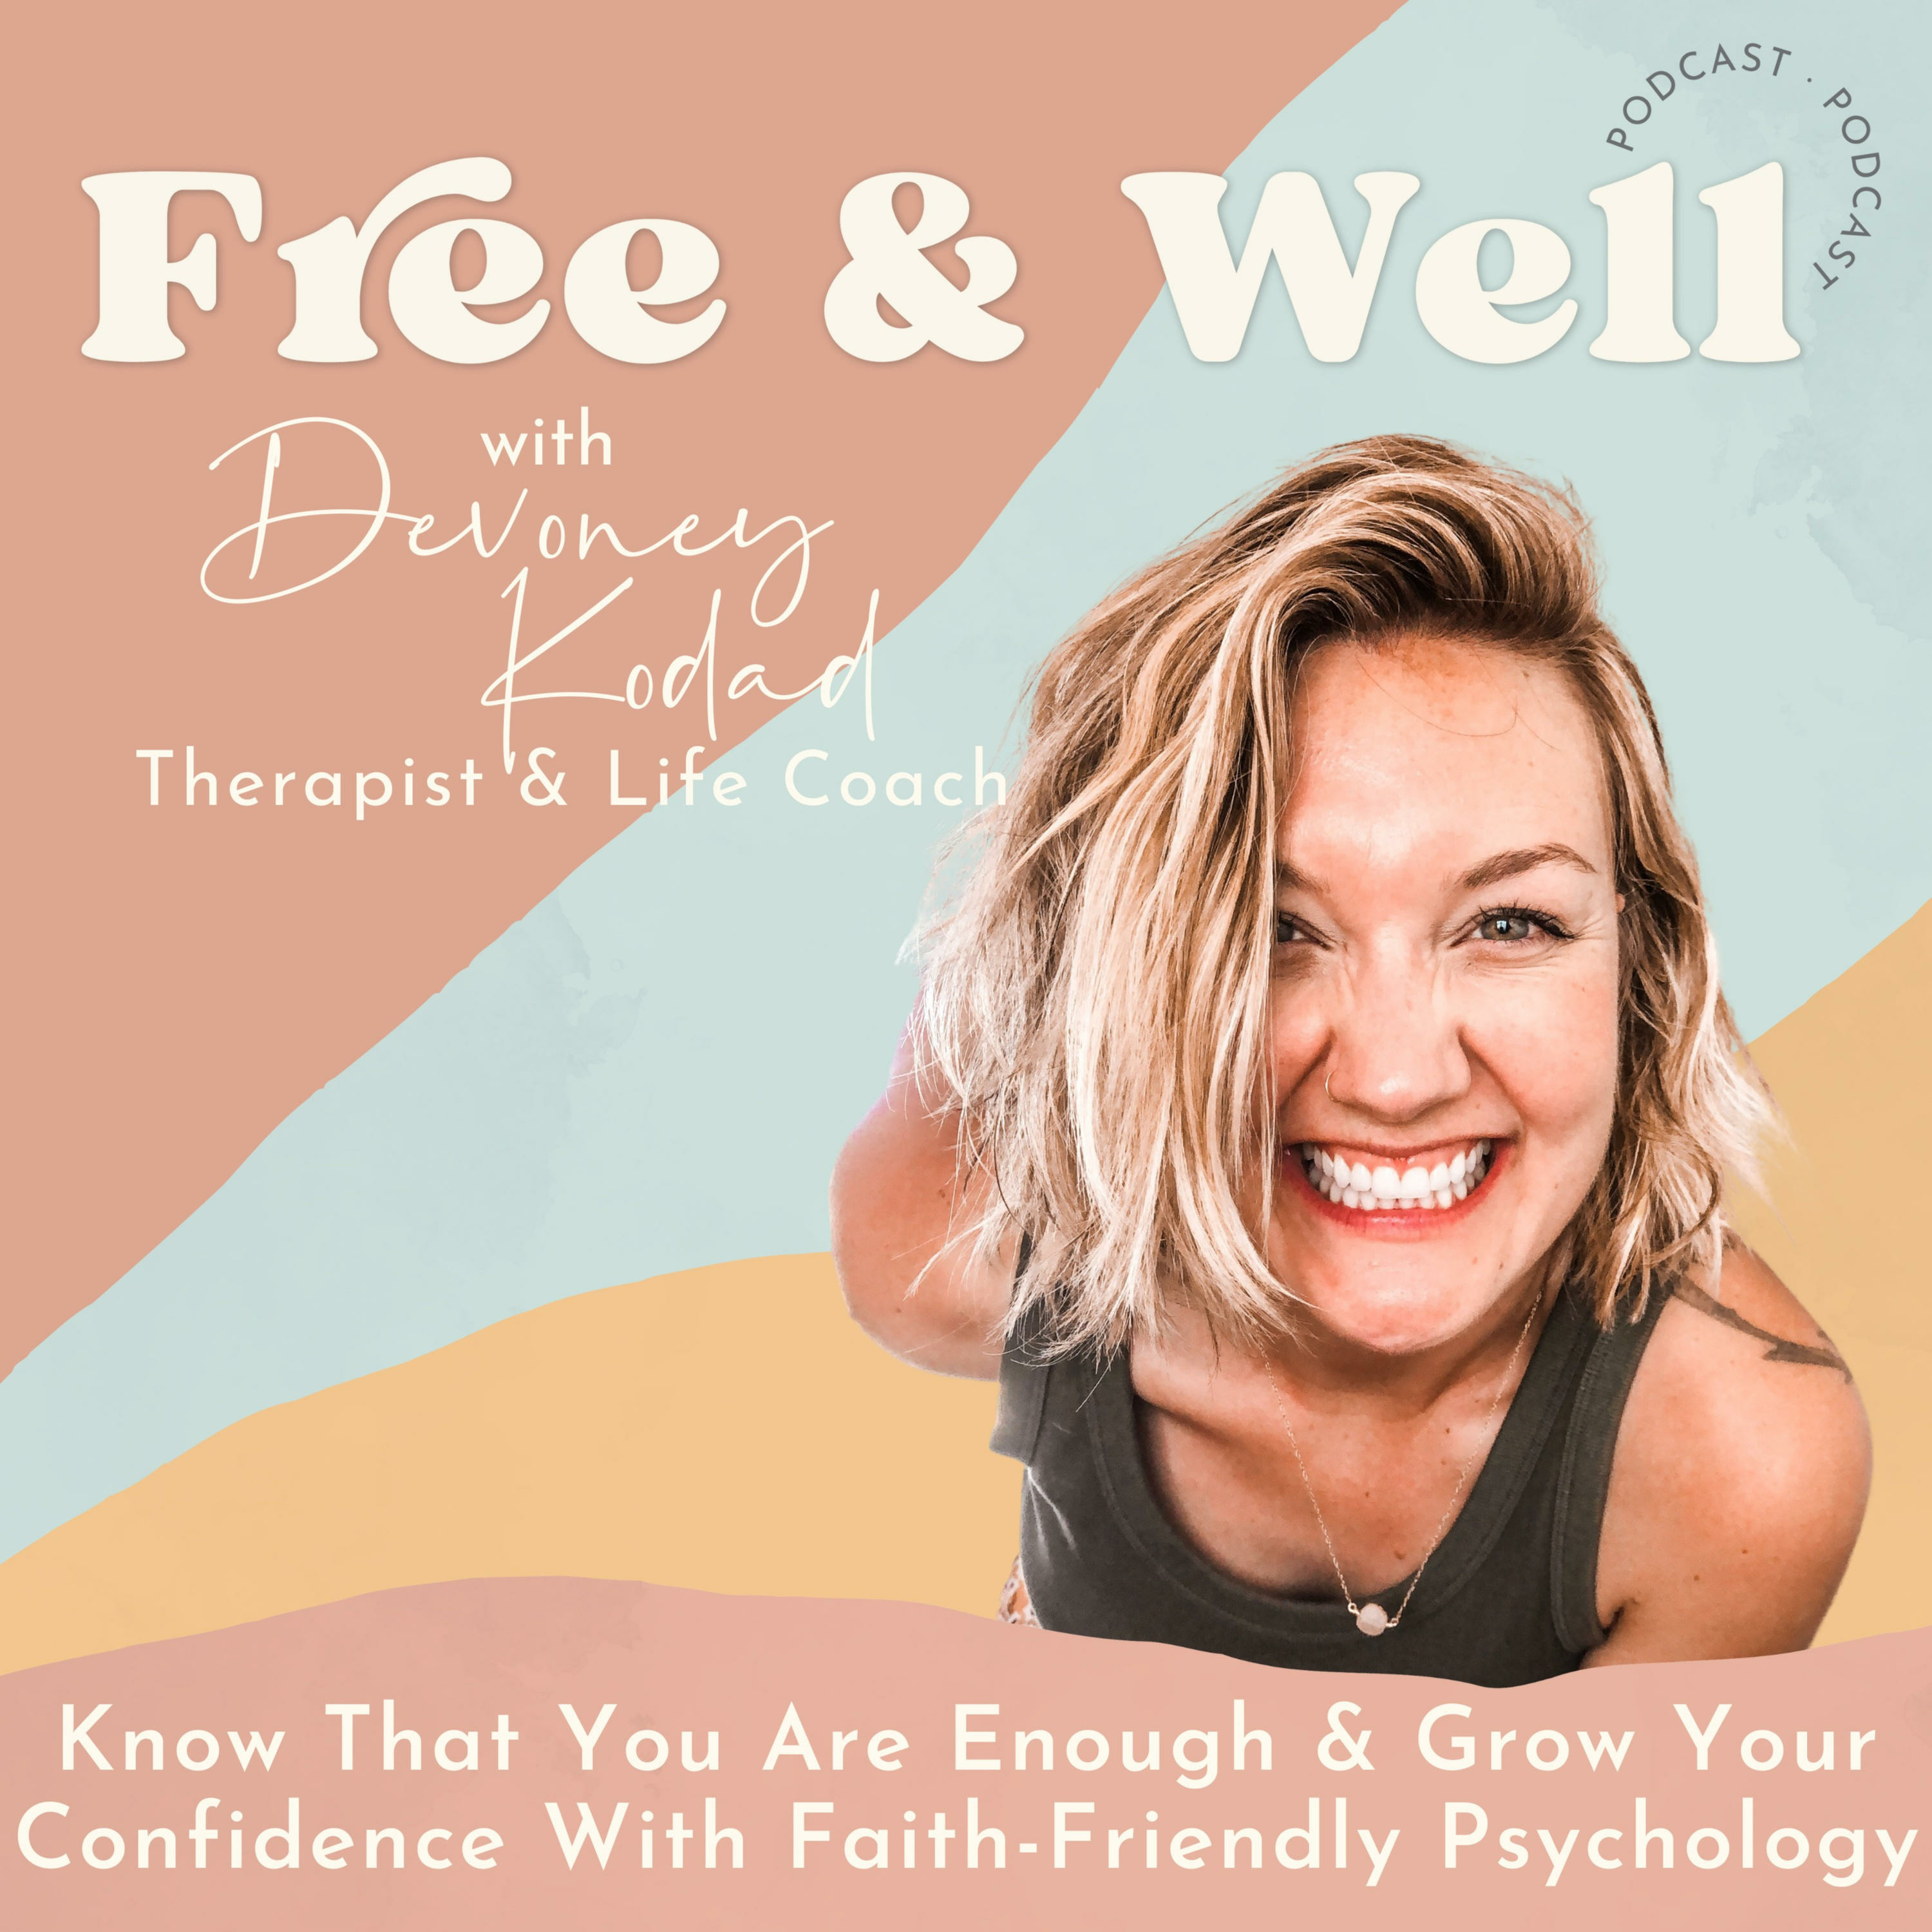 [Wake Up To Your Worth] 2 Powerful Body Based Practices to Add Into Your Daily Routines that Will Soothe Anxiety & Help You Start Genuinely Knowing You Are Enough to Grow Your Self Worth